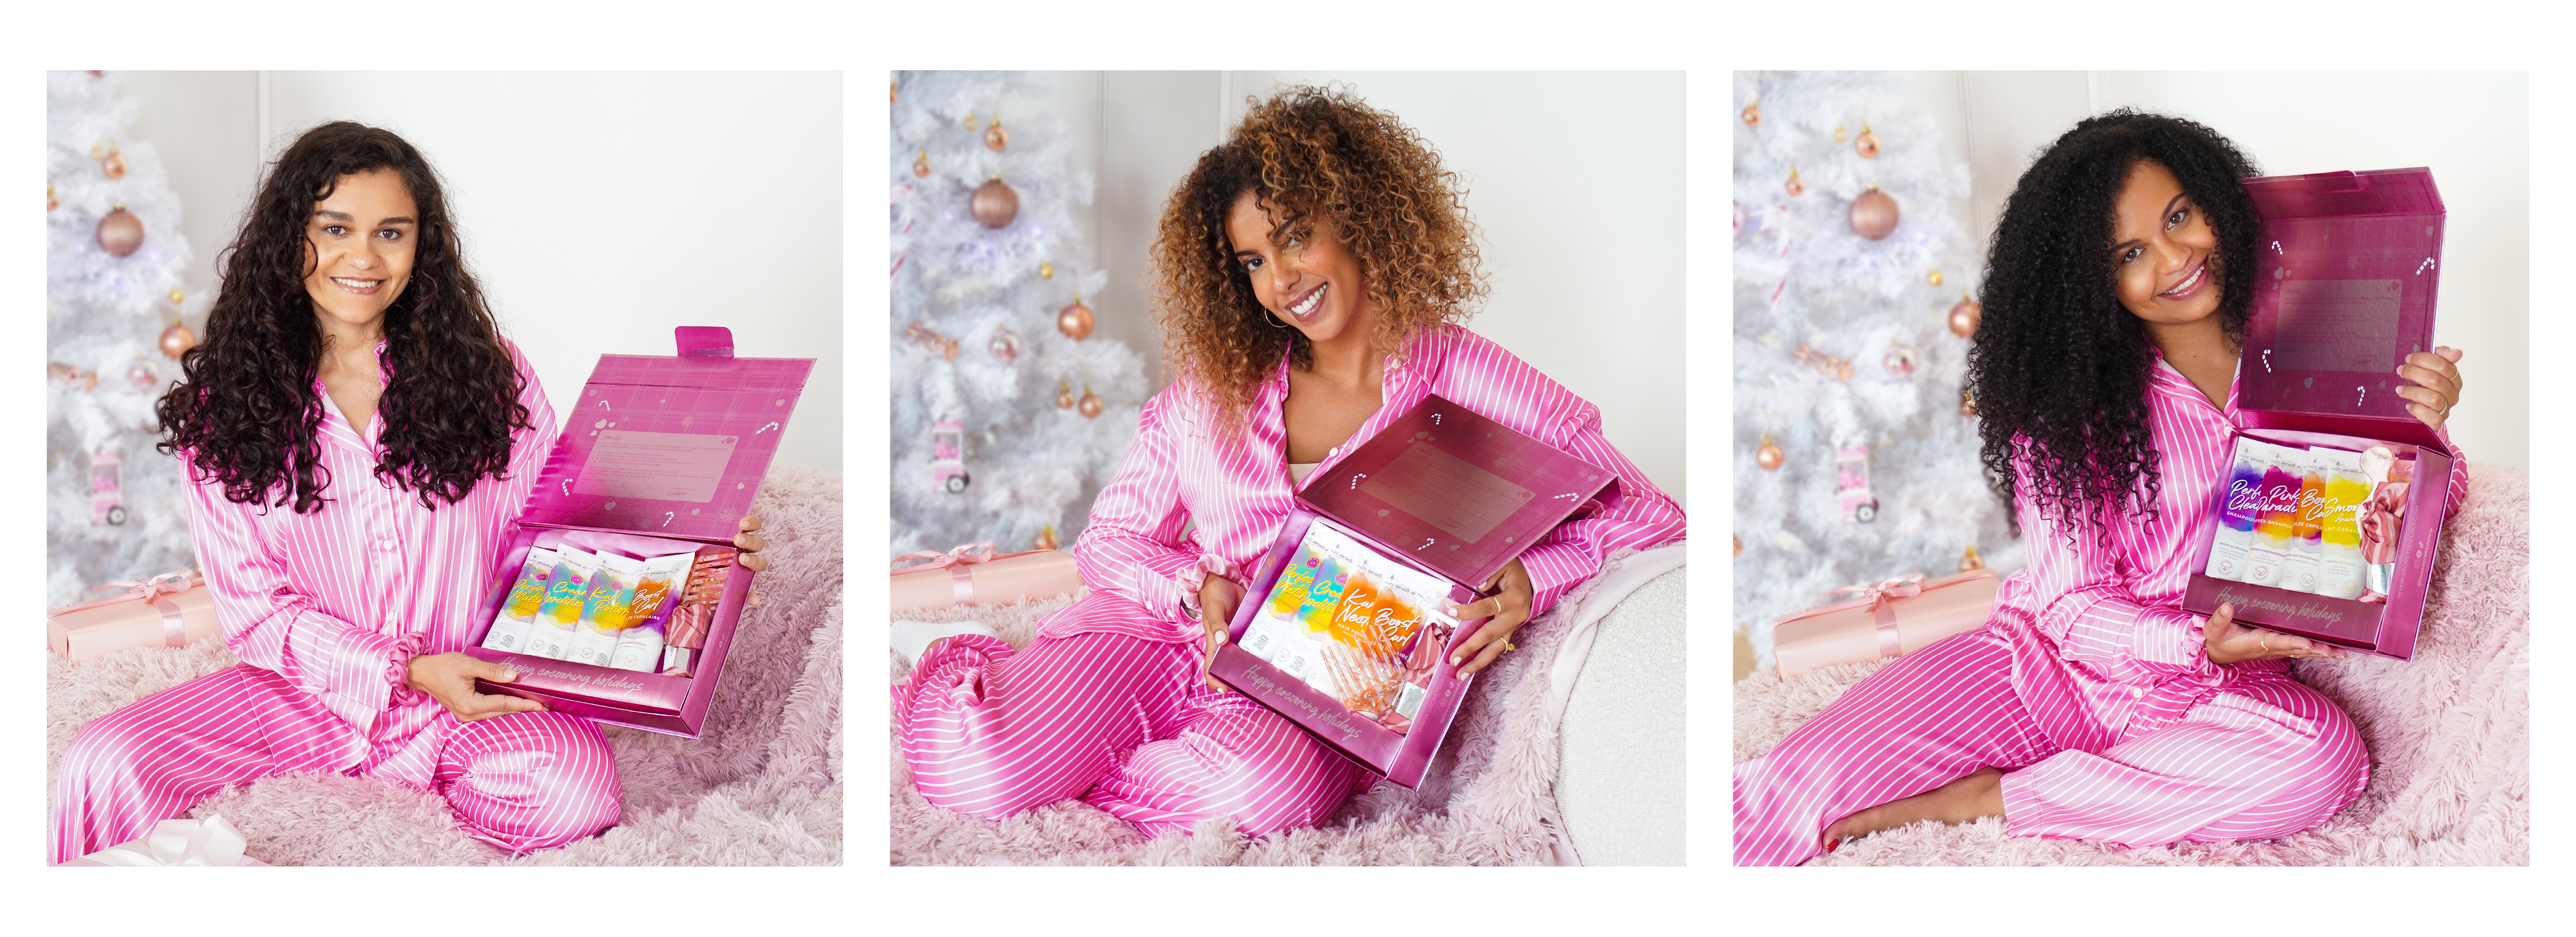 Christmas boxes - our gift ideas for textured hair